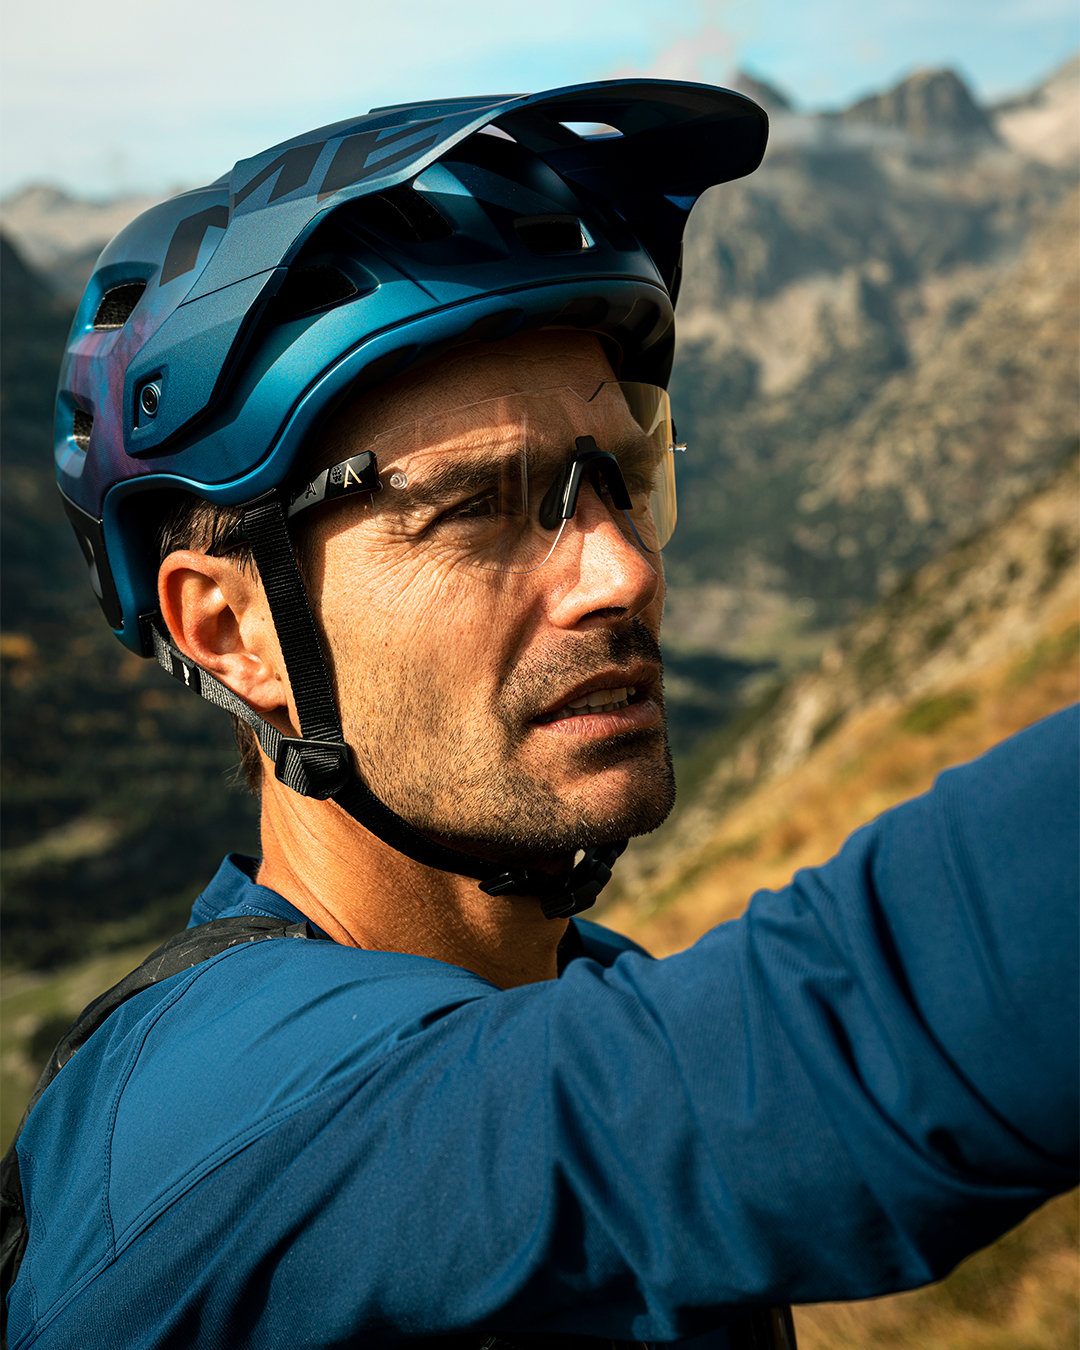 Selecting a Gravel Bike Helmet for Different Climates